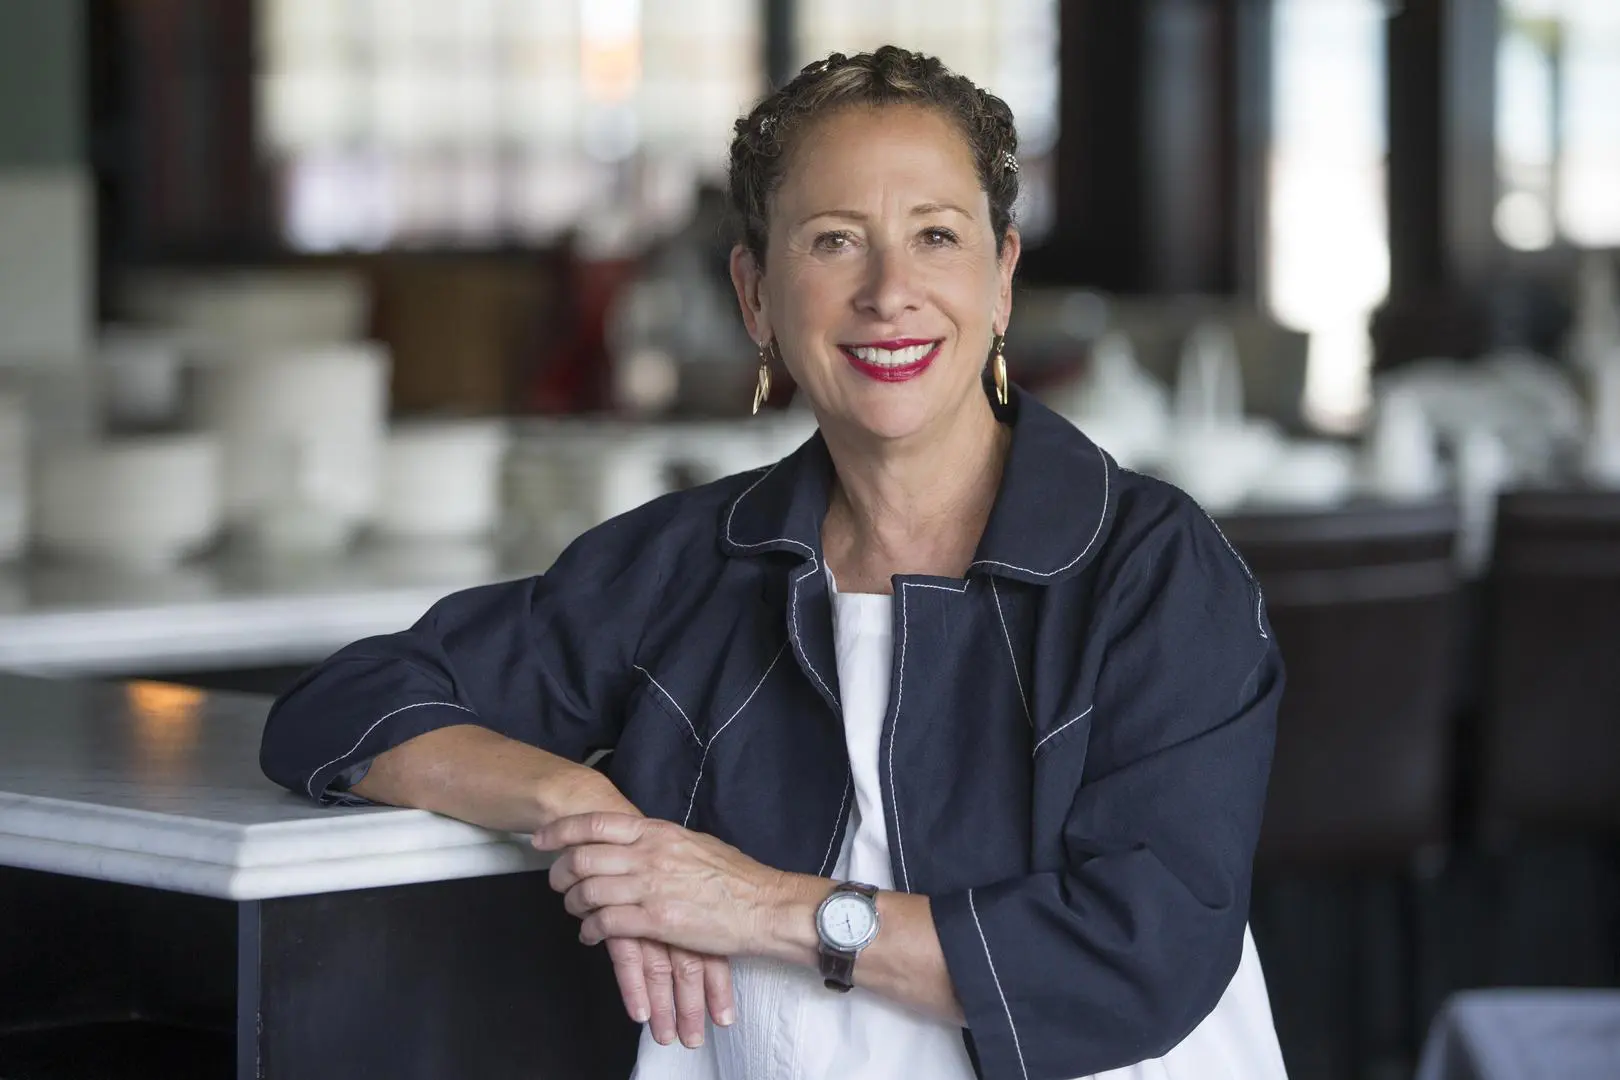 American Chef and Baker Nancy Silverton at CHI SPACCA, a Luxury Dining Restaurant in Riyadh - Cool Inc